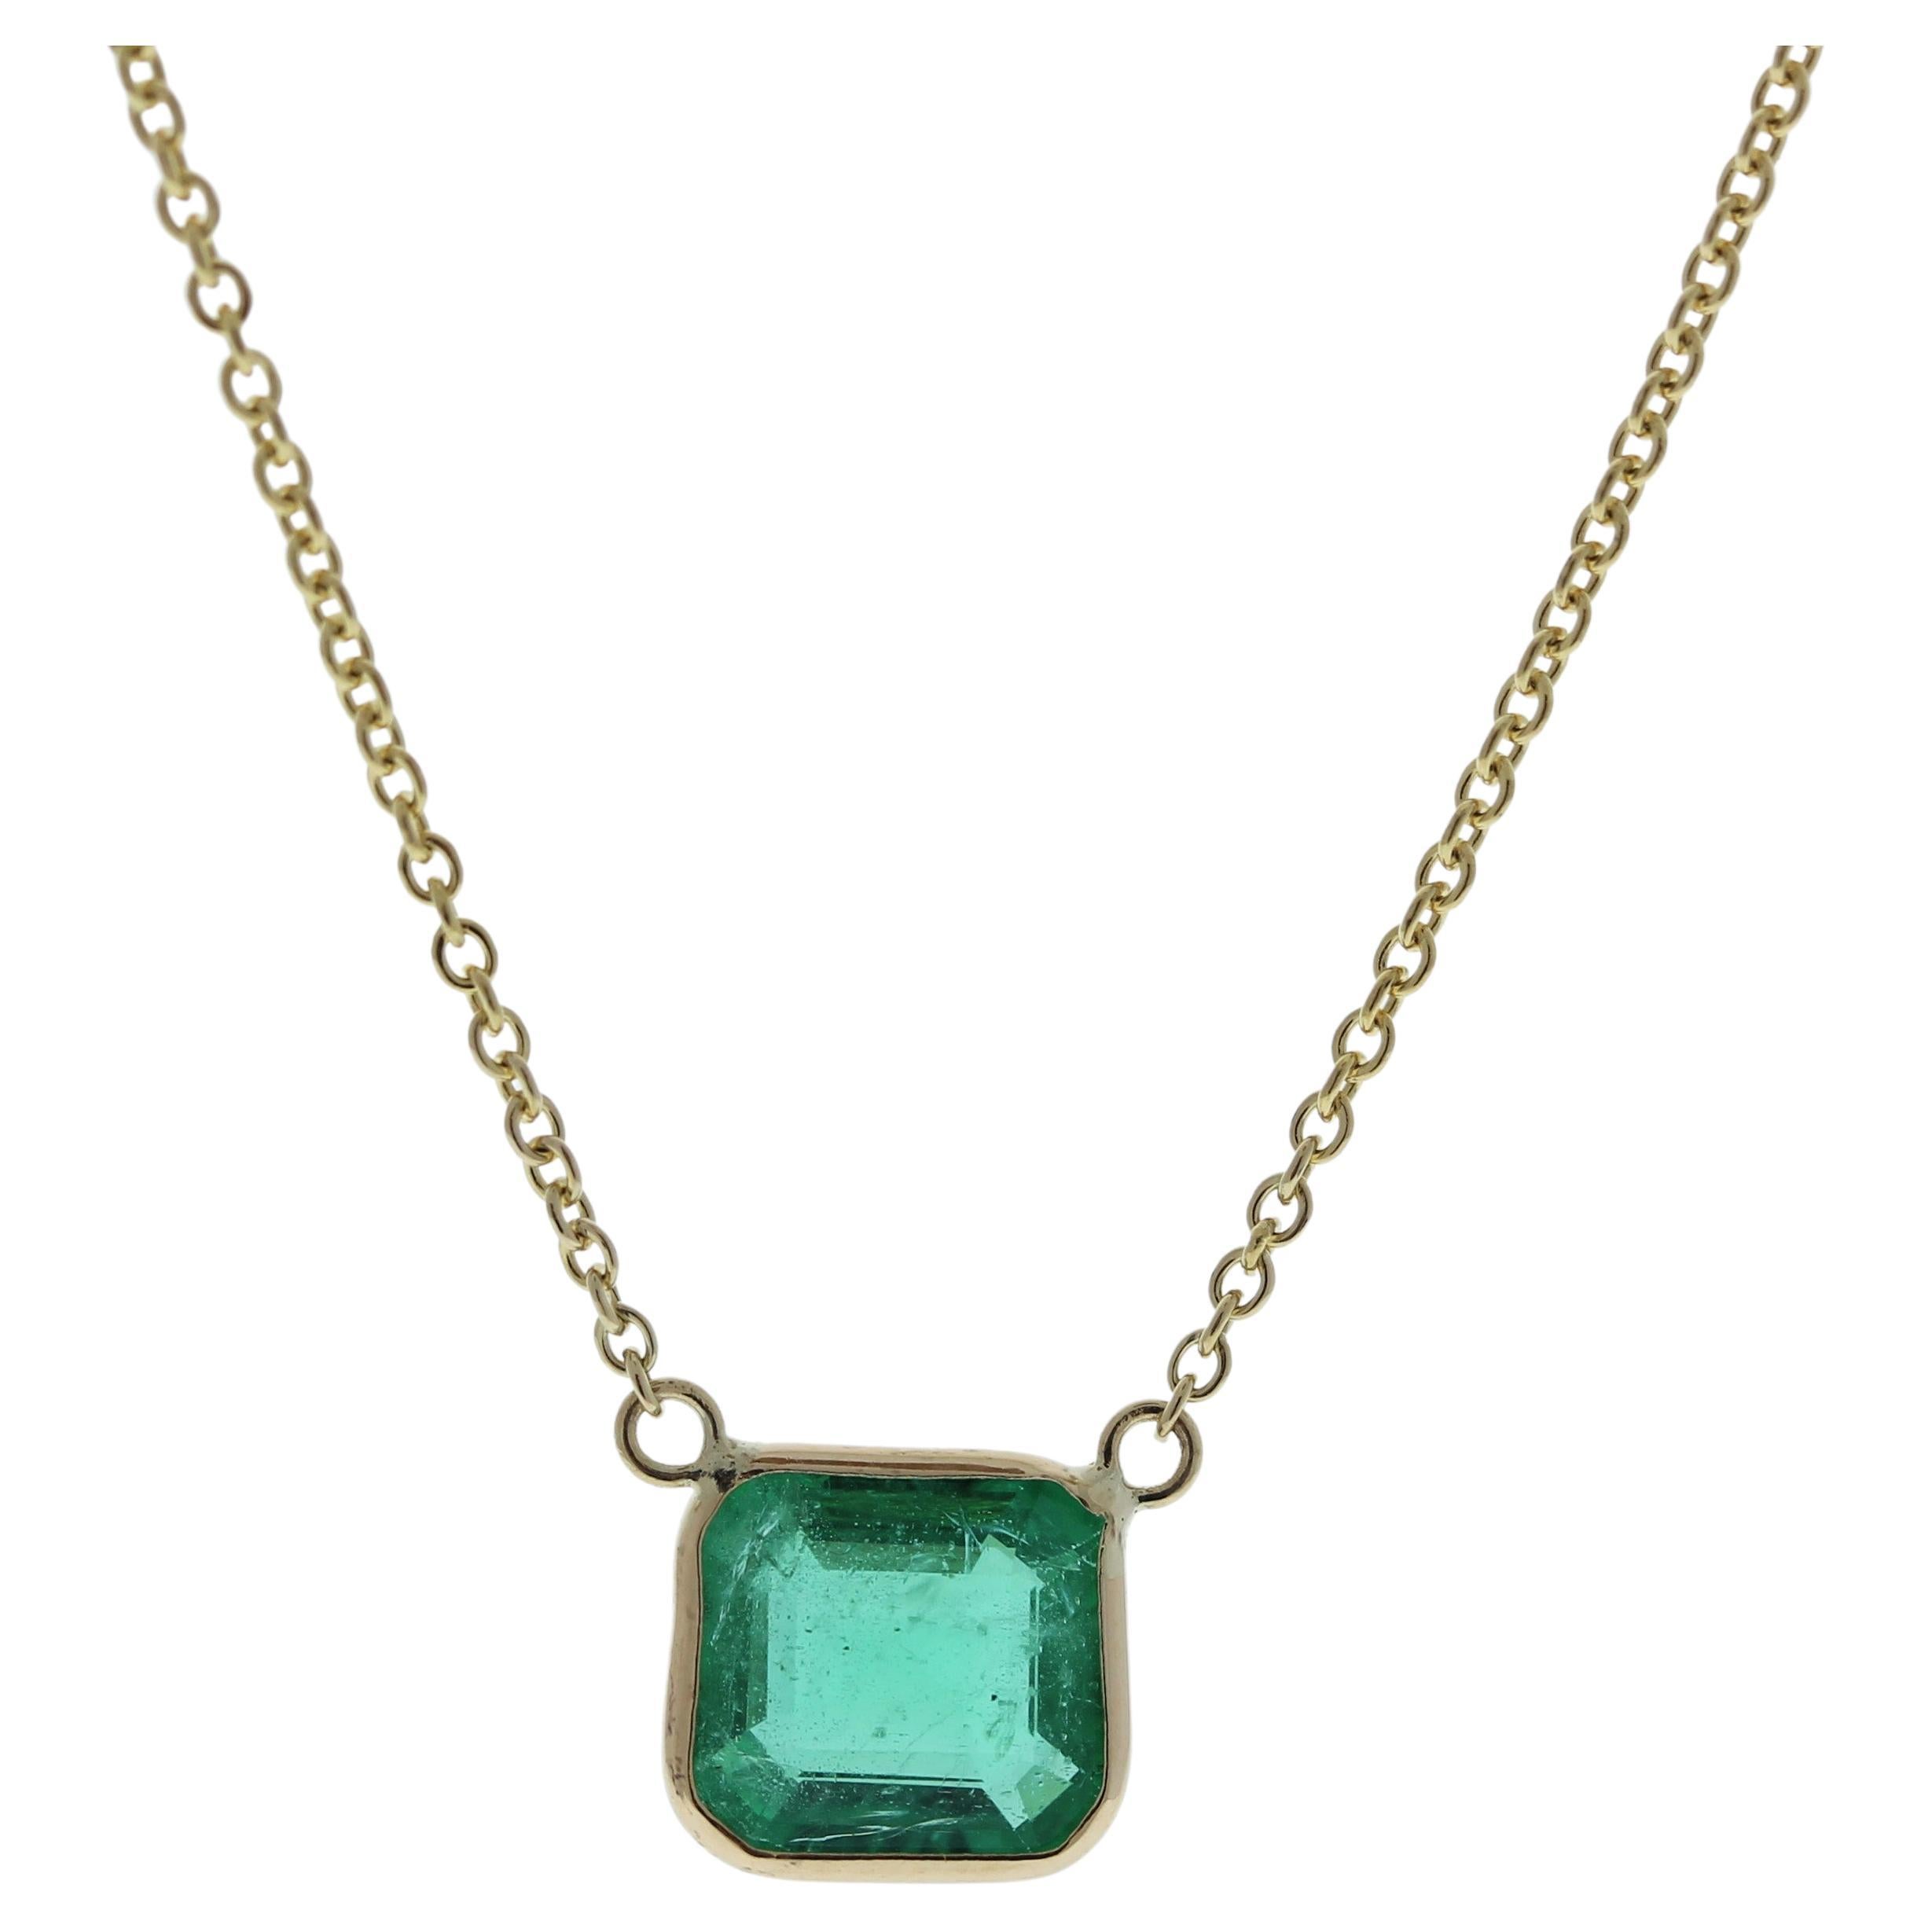 1.57 Carat Asscher Emerald Green Fashion Necklaces In 14k Yellow Gold For Sale